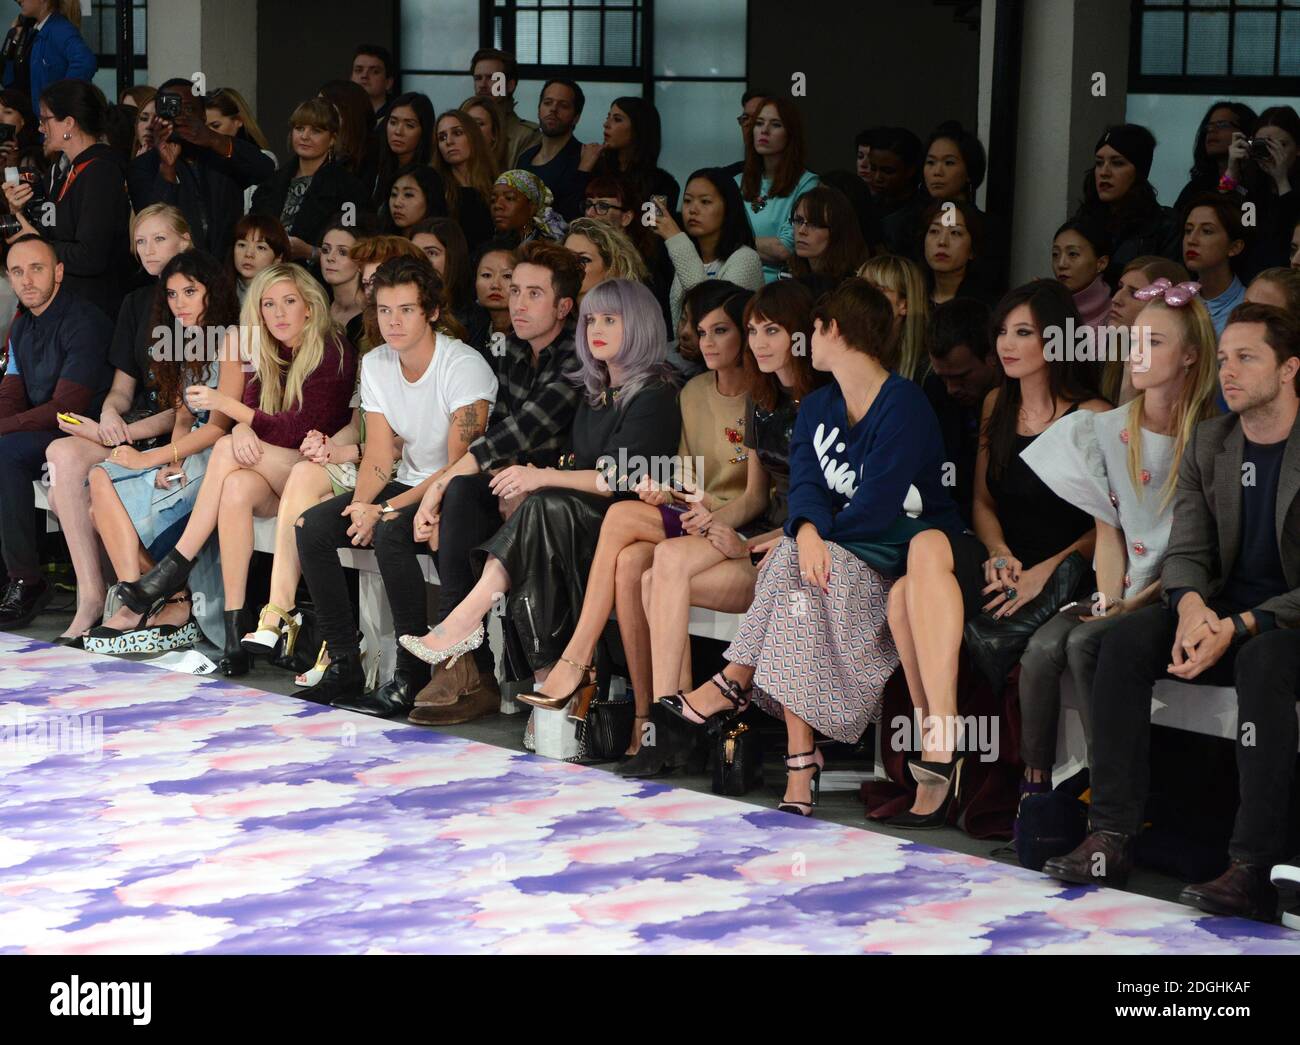 (Left to Right) Eliza Doolittle, Ellie Goulding, Nicola Roberts, Harry Styles, Nick Grimshaw, Kelly Osbourne, Leigh Lezark, Alexa Chung, Pixie Geldof and Daisy Lowe at the House of Holland Catwalk Show Catwalk Show, part of London Fashion Week, Spring Summer 2014, Goldsmiths Hall.  Stock Photo